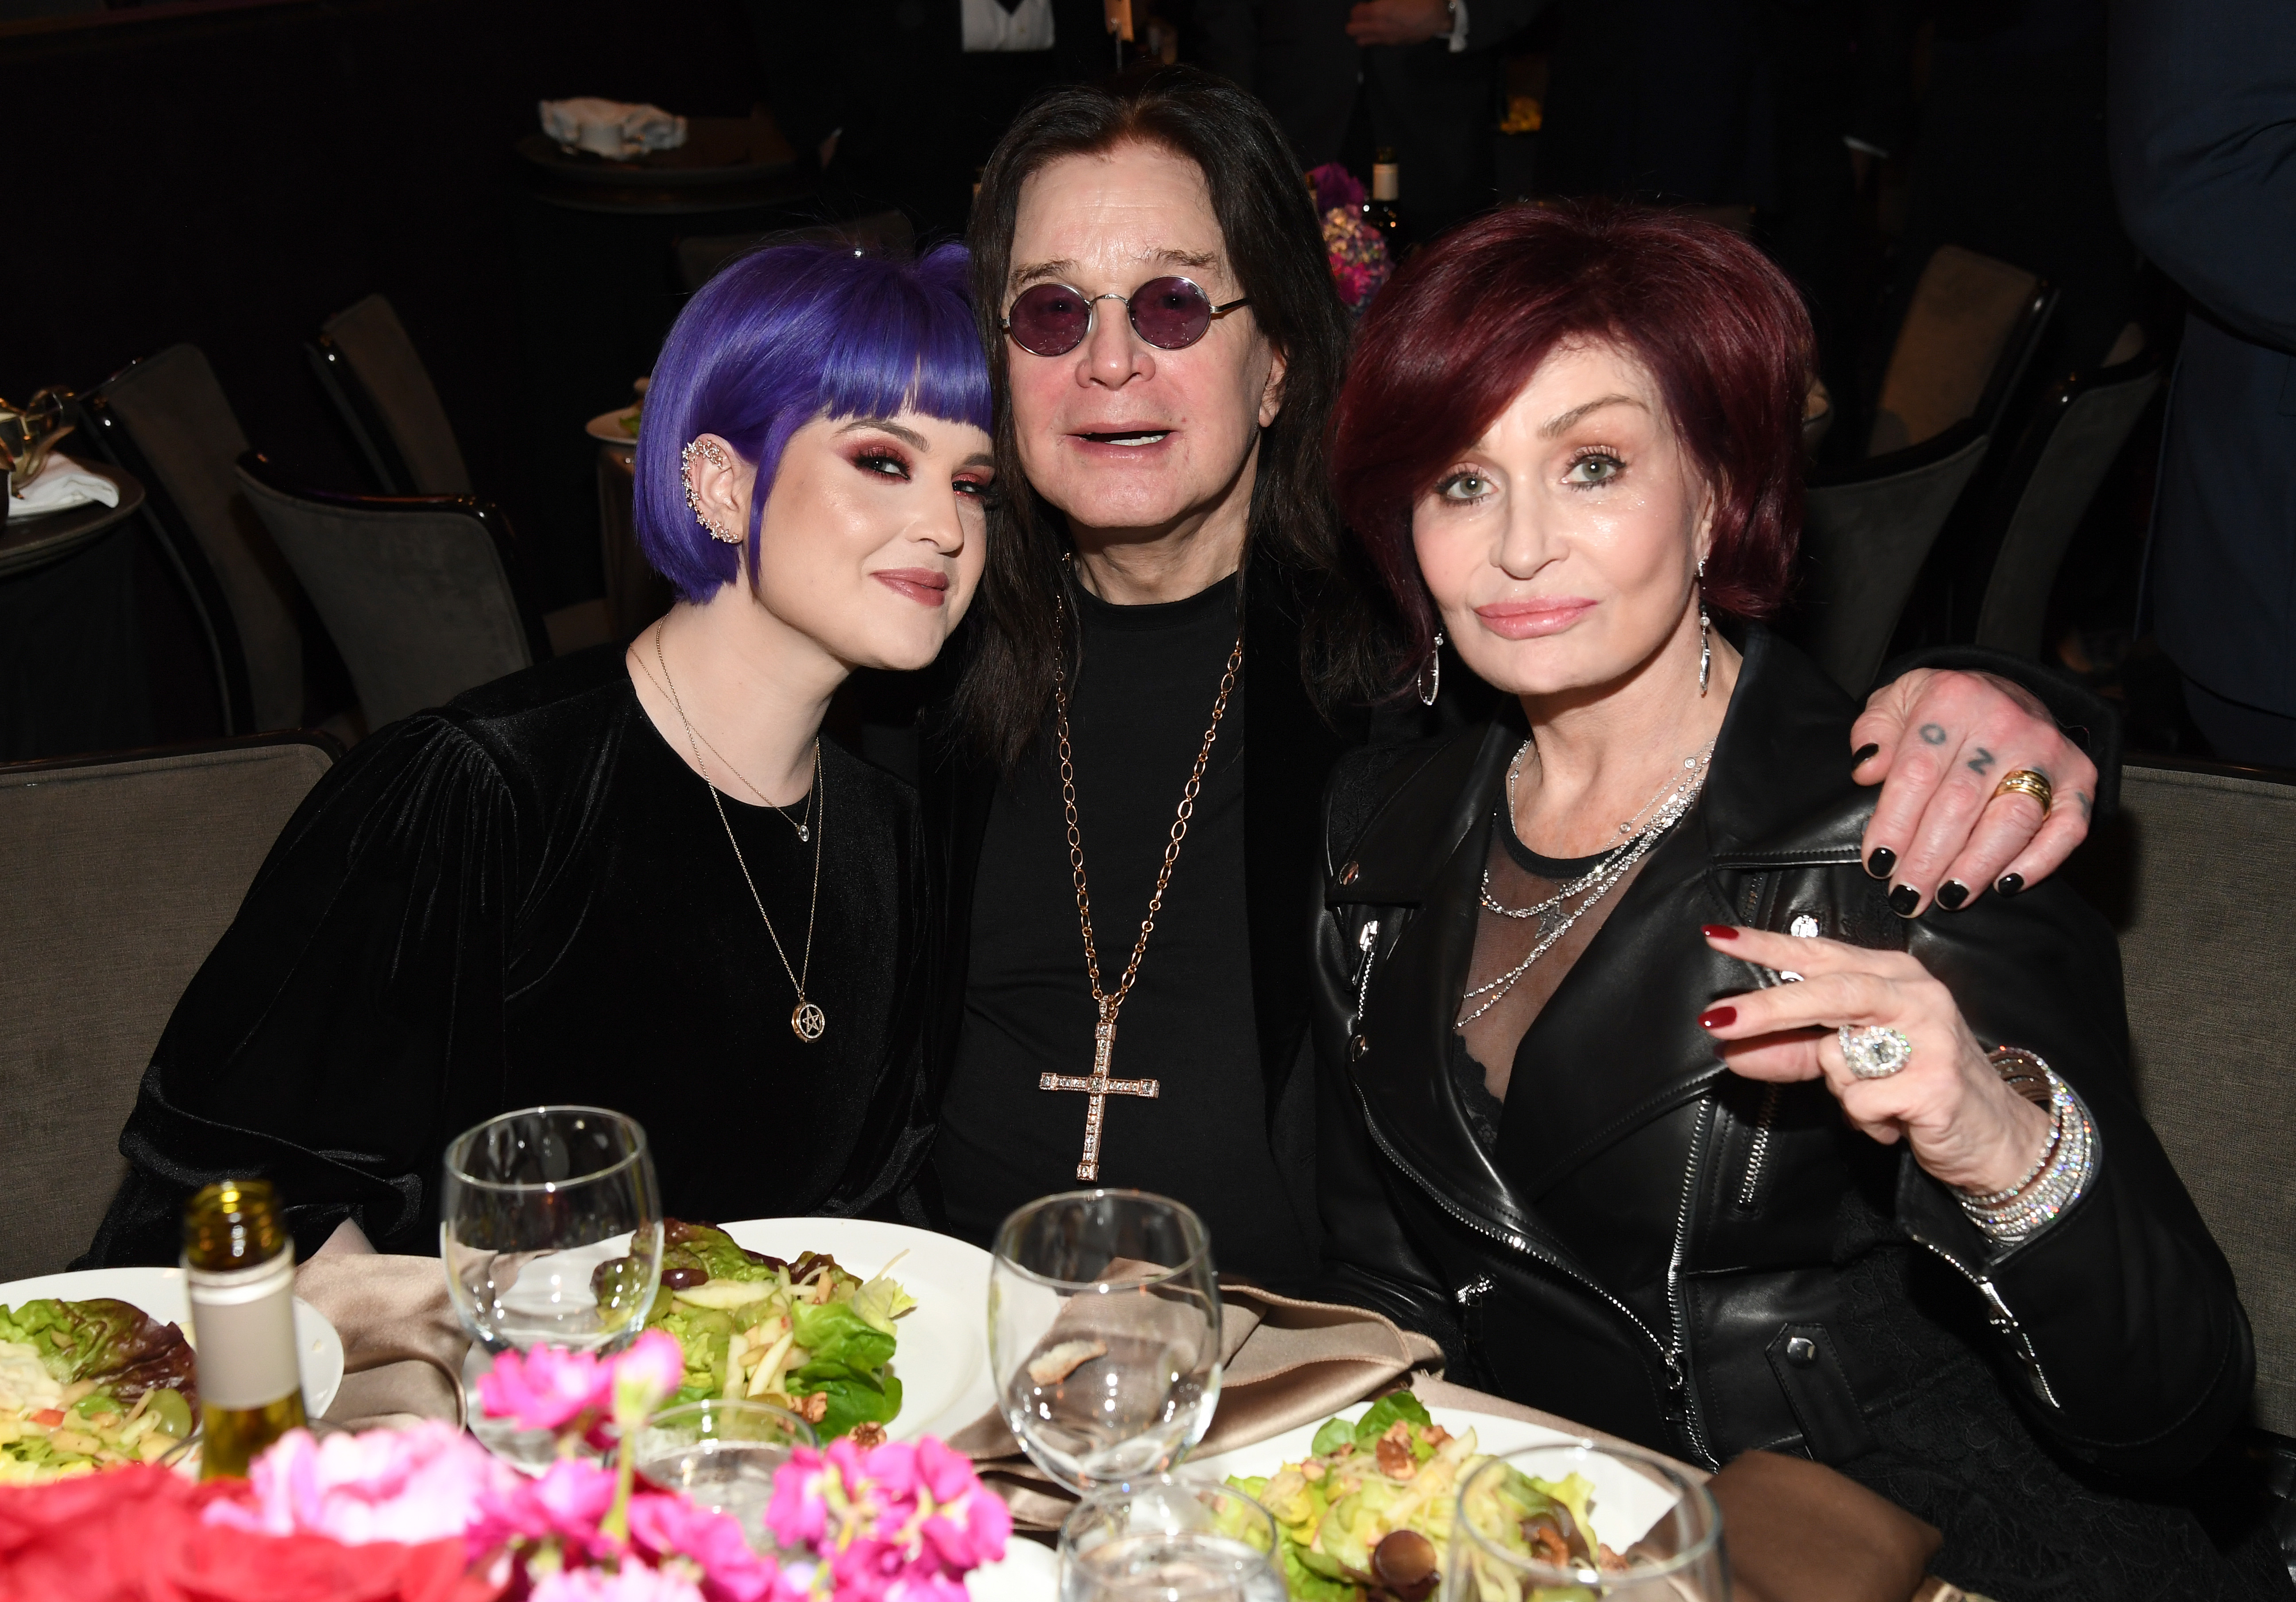 Kelly Osbourne, Ozzy Osbourne, and Sharon Osbourne at the GRAMMY Salute to Industry Icons Honoring Sean Combs in Beverly Hills, California on January 25, 2020 | Source: Getty Images